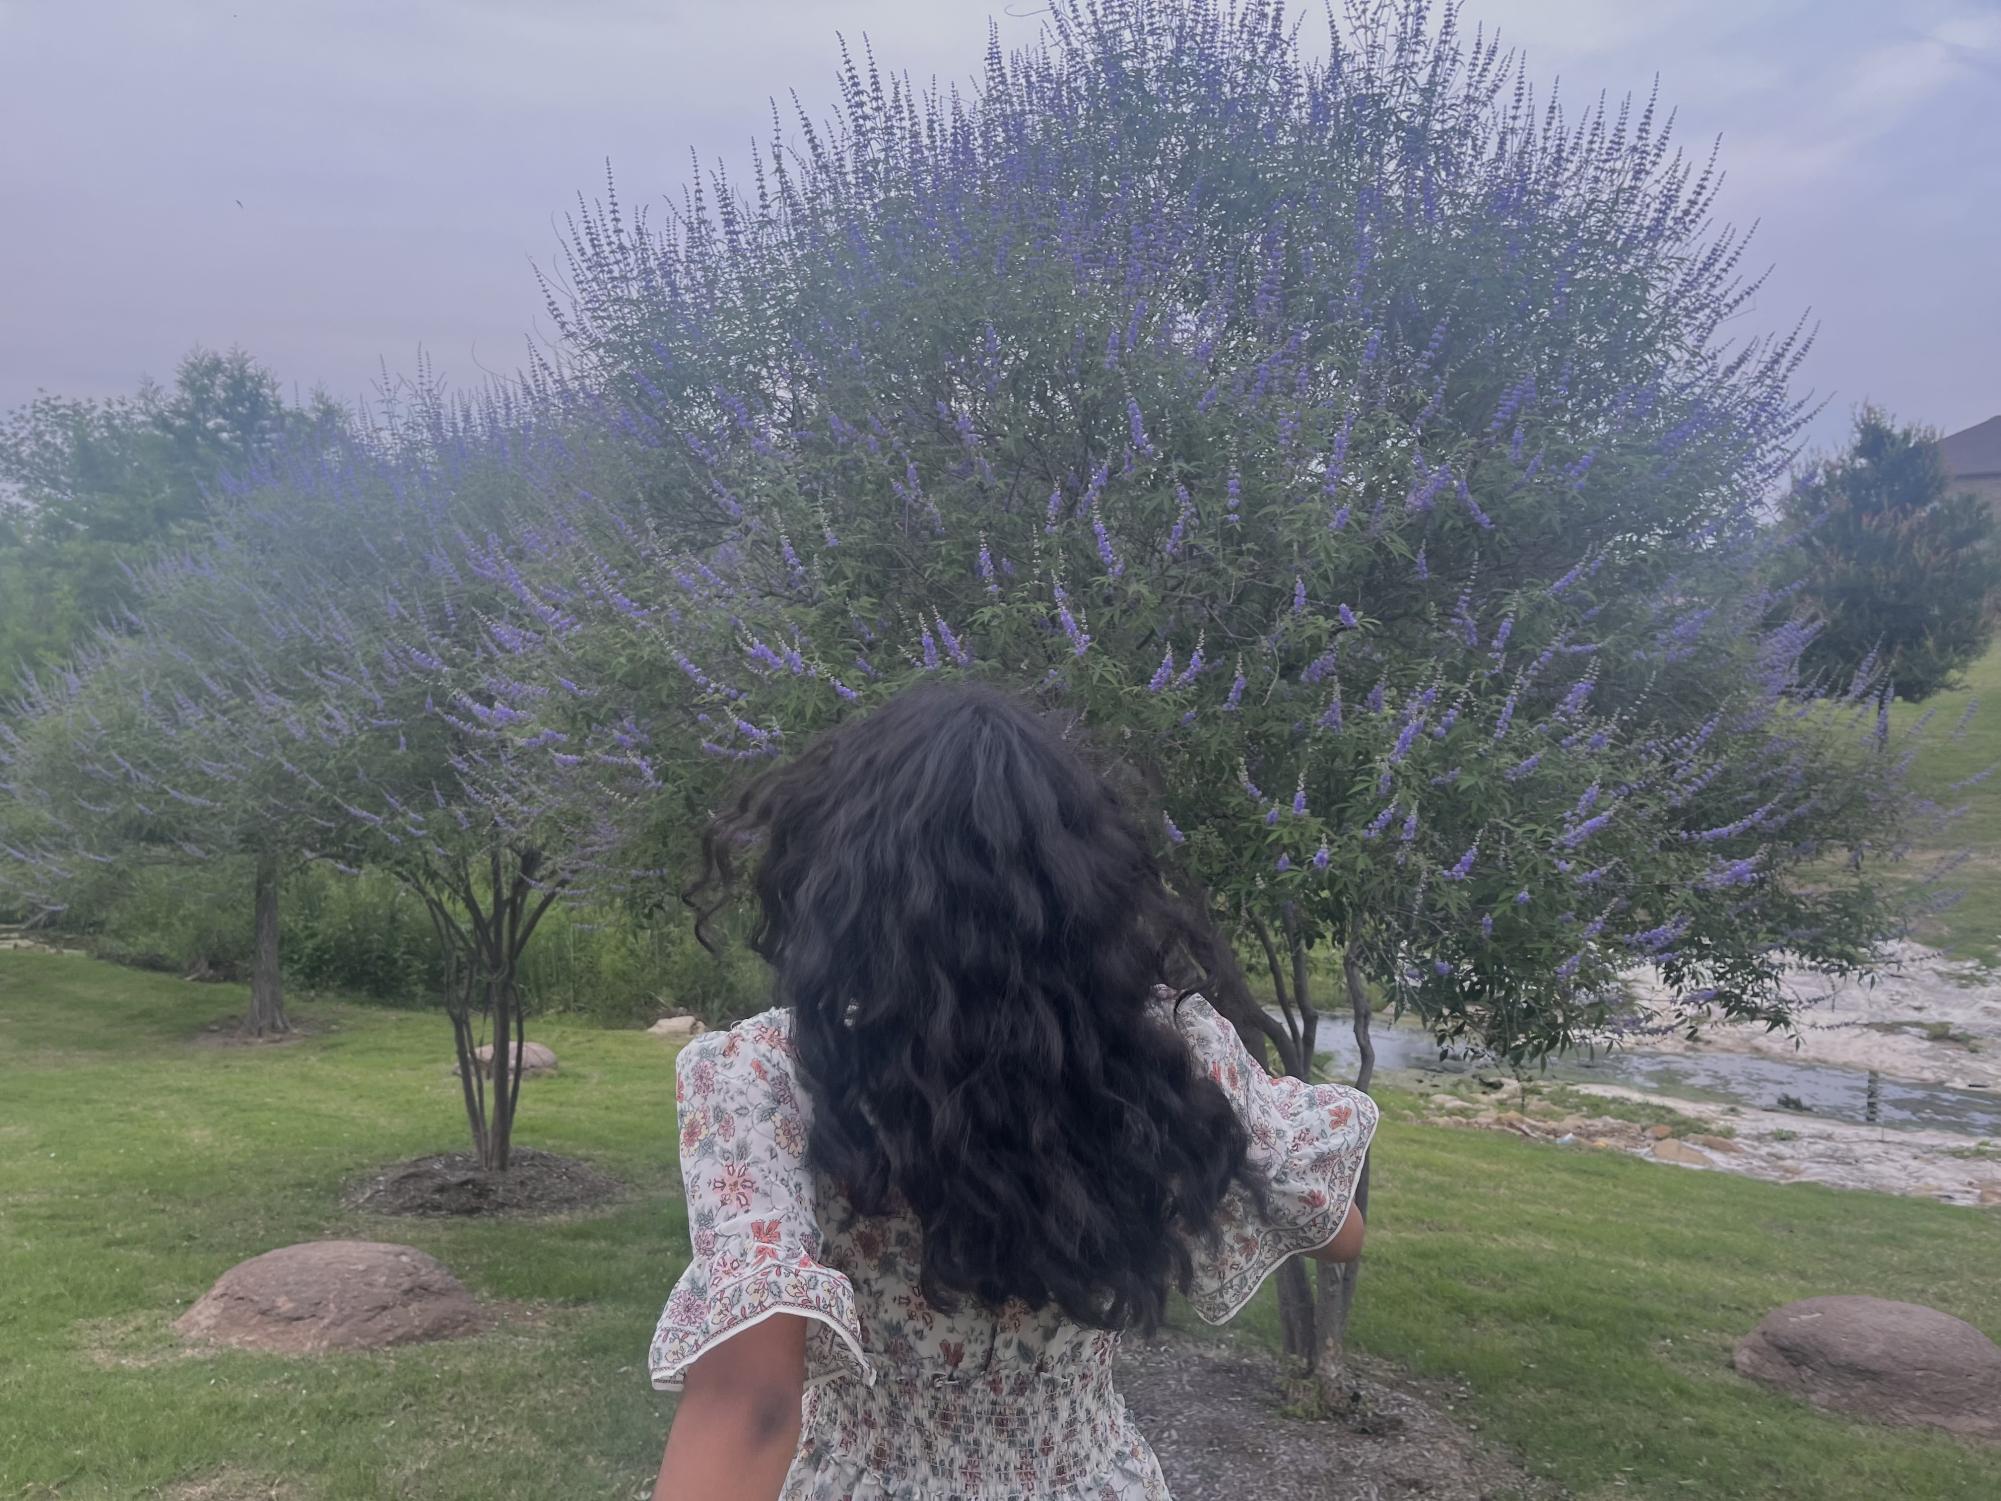 The Sidekick staff designer Greeshma Marathu is grateful for her curly hair. She writes about facing insecurities with her hair and her journey overcoming them.